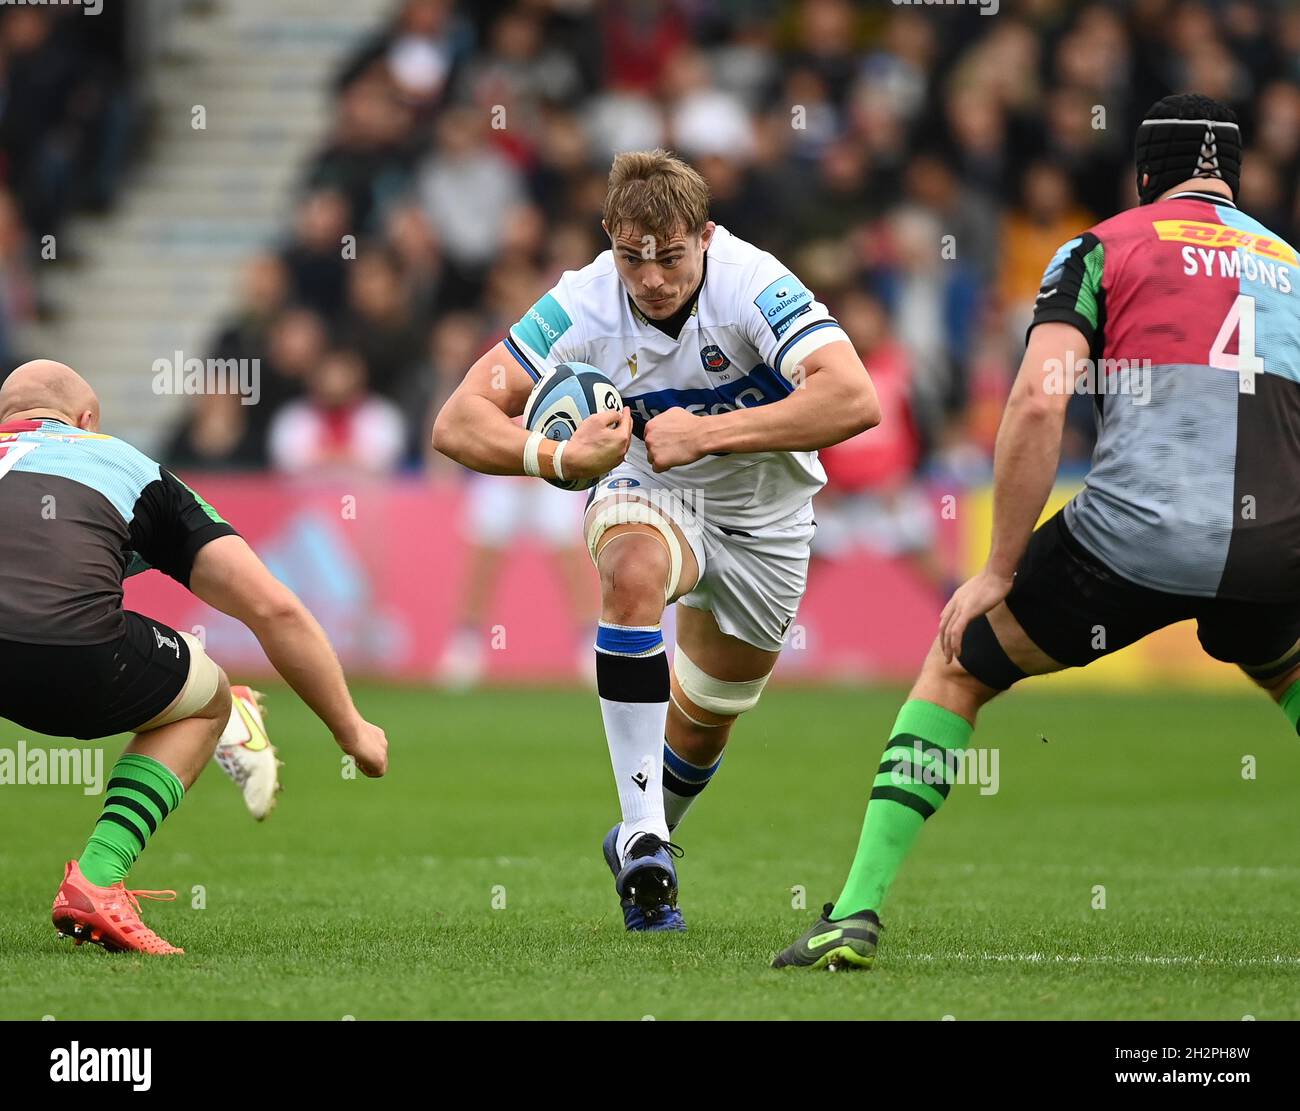 Twickenham, United Kingdom. 23rd Oct, 2021. Premiership Rugby. Harlequins V Bath Rugby. The Stoop. Twickenham. Tom Ellis (Bath) with the ball. Credit: Sport In Pictures/Alamy Live News Stock Photo